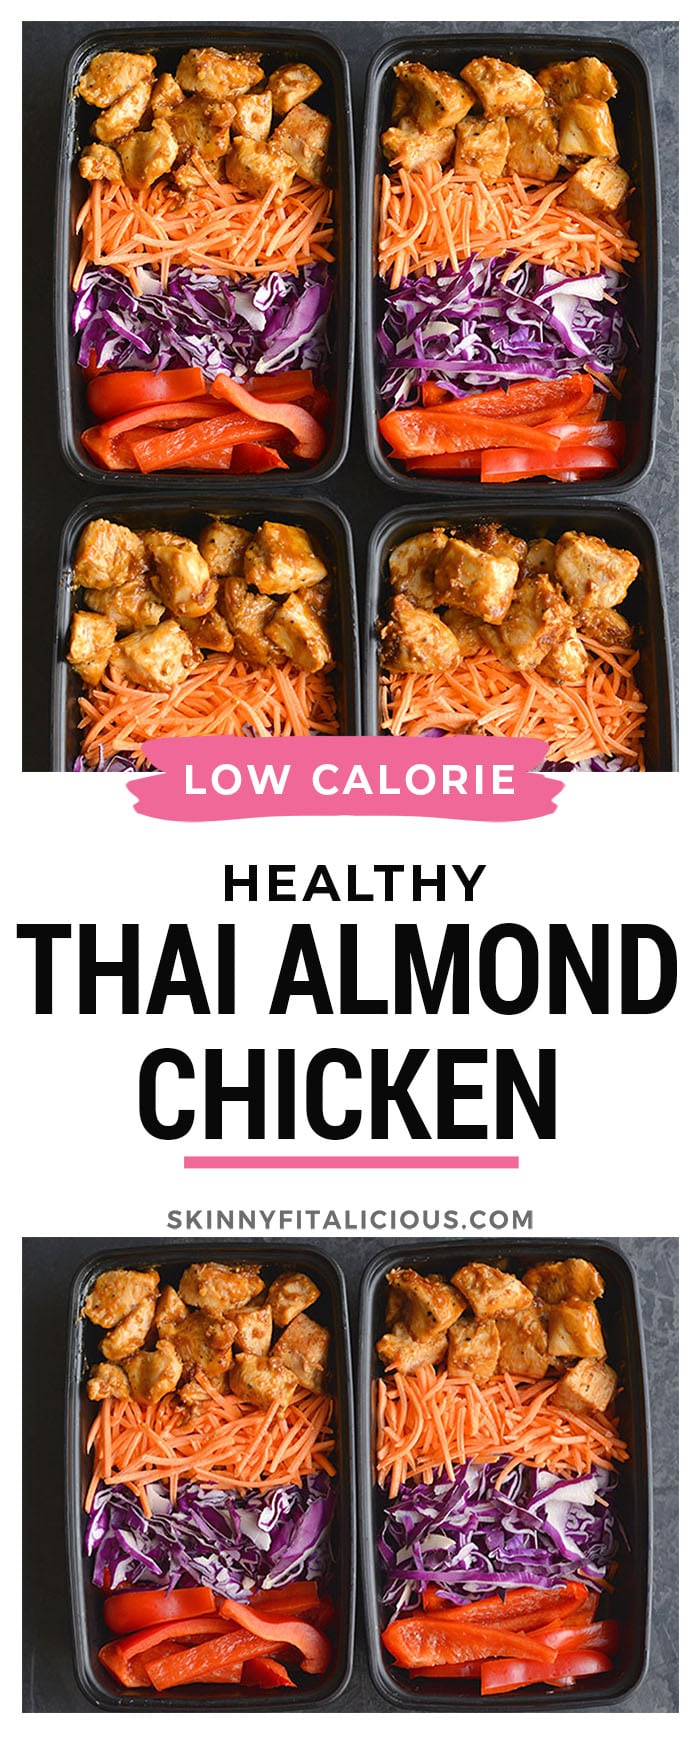 Meal Prep Thai Almond Chicken! Packed with flavor and nourishment, this meal prep recipe is quick to make and filling. Made in 30 minutes, you will love this creamy, Thai flavored chicken.